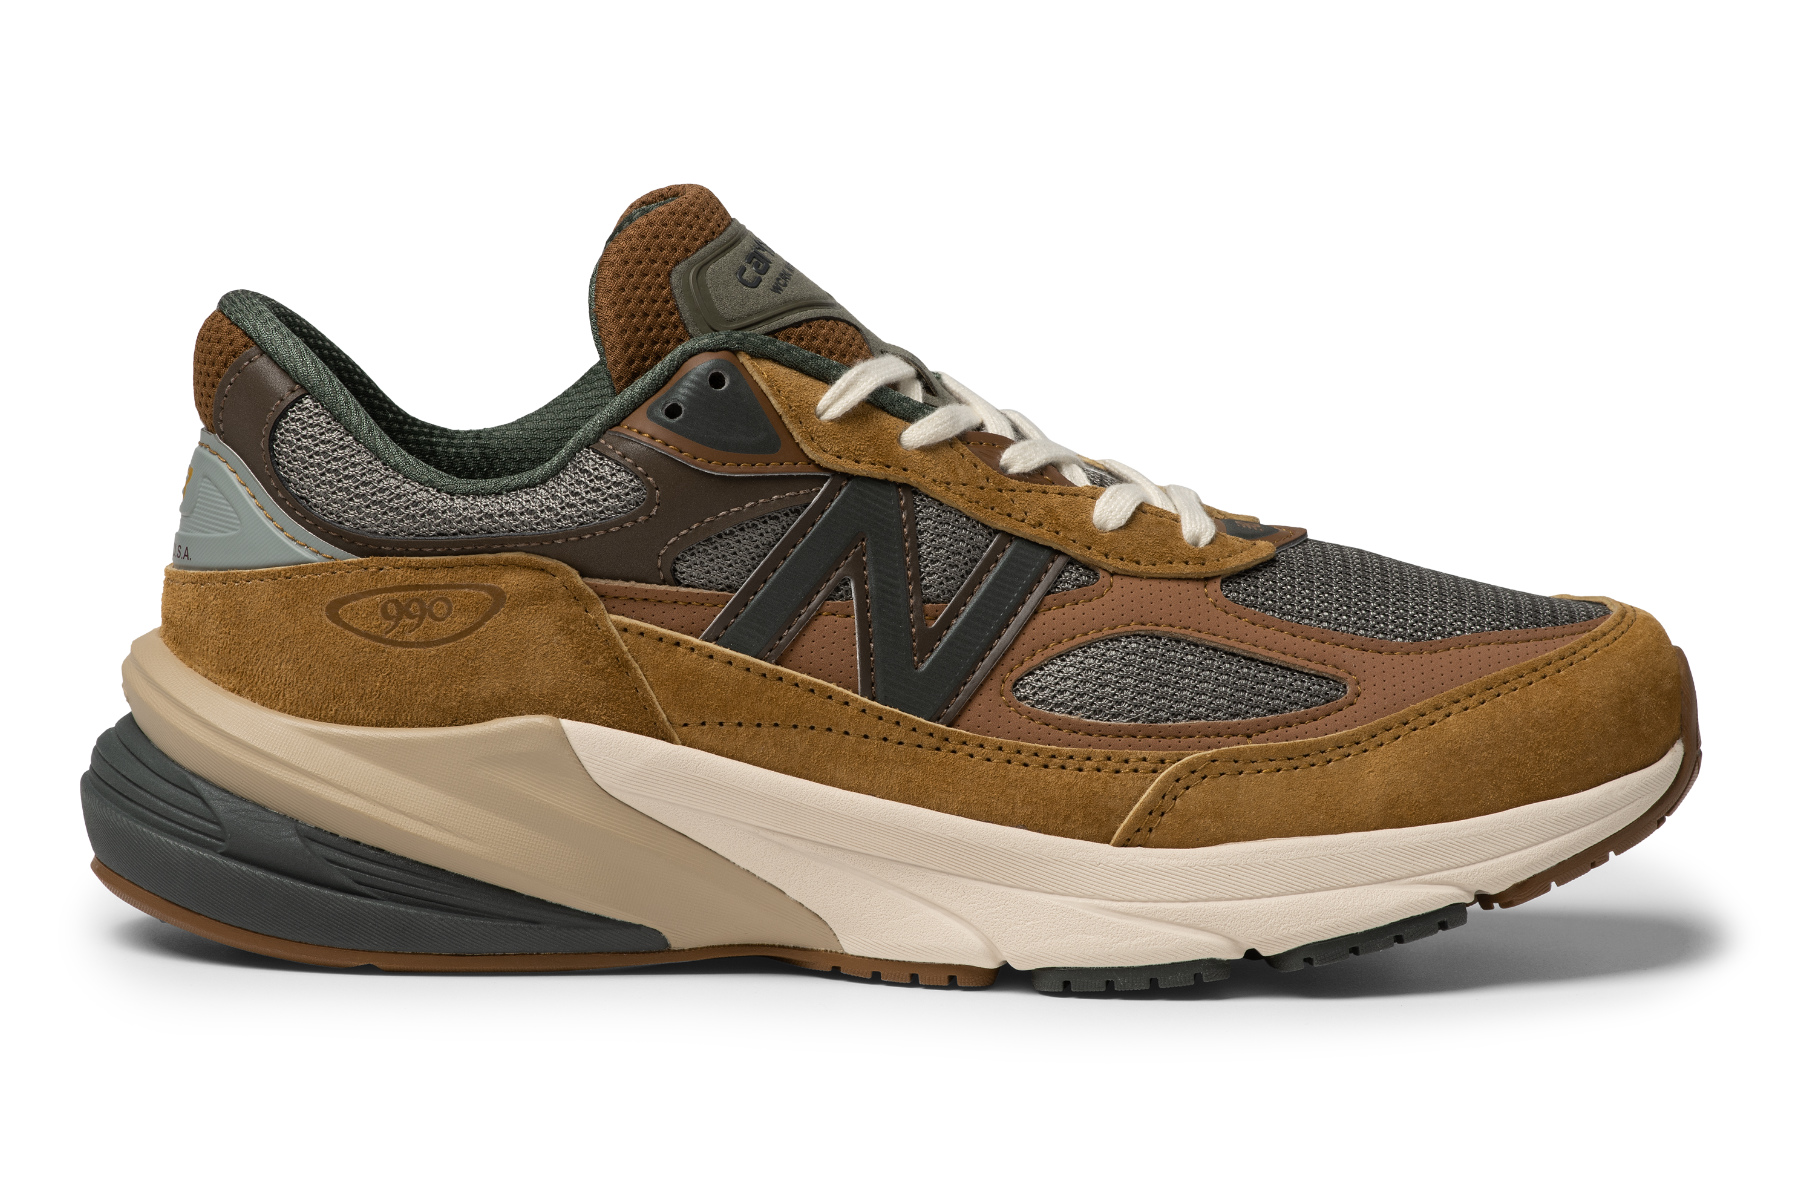 Carhartt WIP x New Balance 990v6 sneaker collaboration is dropping soon.